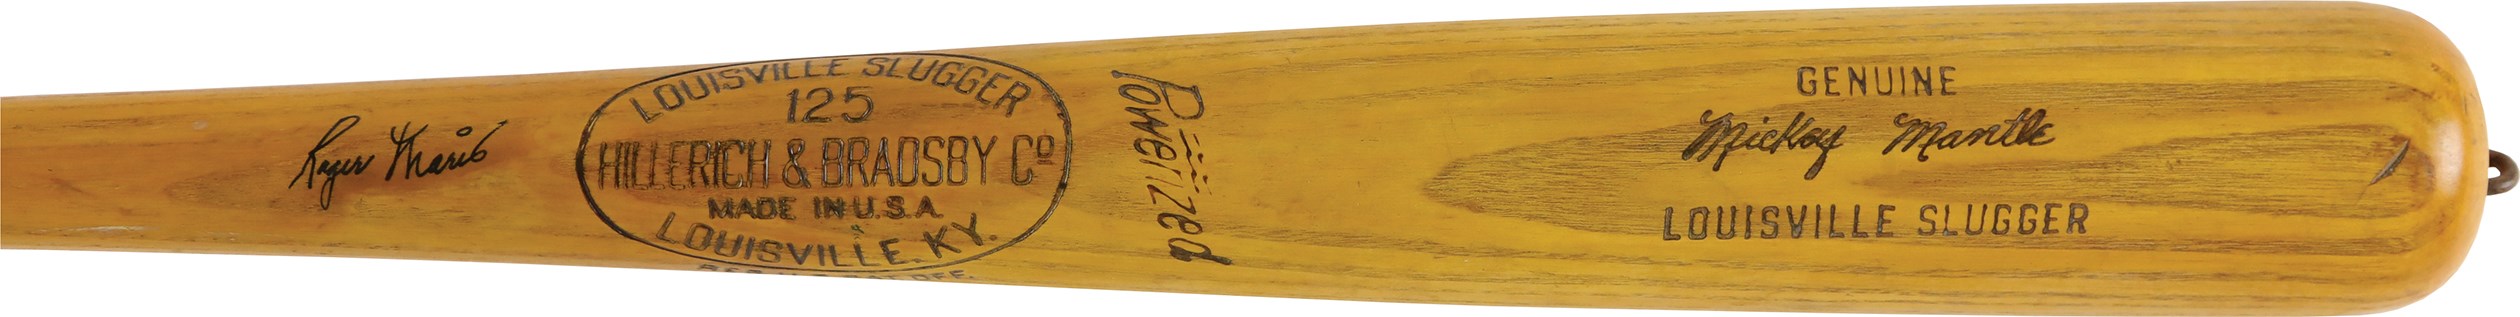 Mantle and Maris - 1958 Mickey Mantle Professional Model Bat Signed by Roger Maris - Rookie Era Signature (PSA)